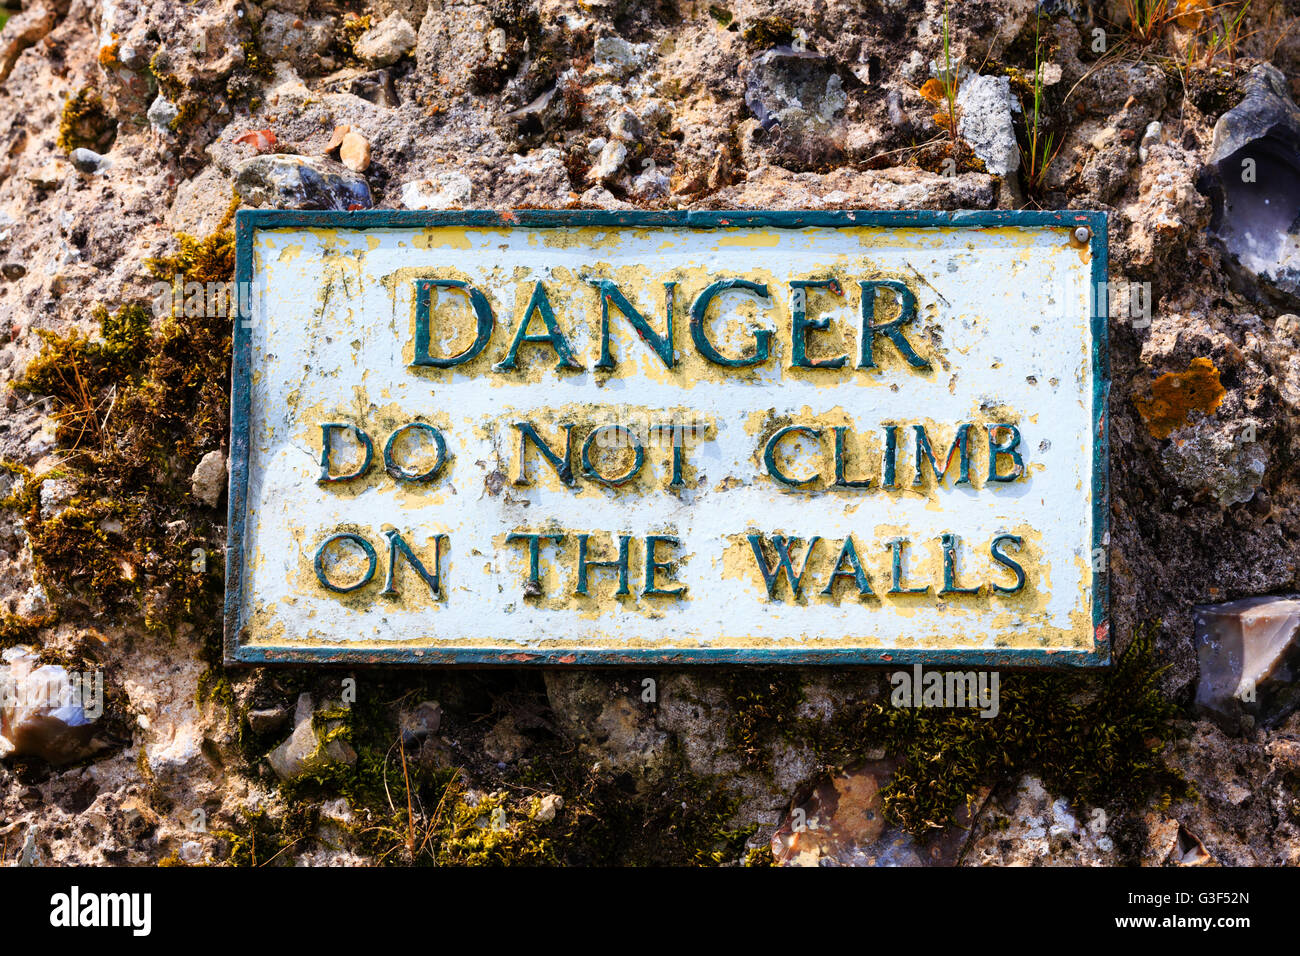 Danger sign on the walls of the Roman Fort at Burgh Castle, Norfolk, England. Stock Photo